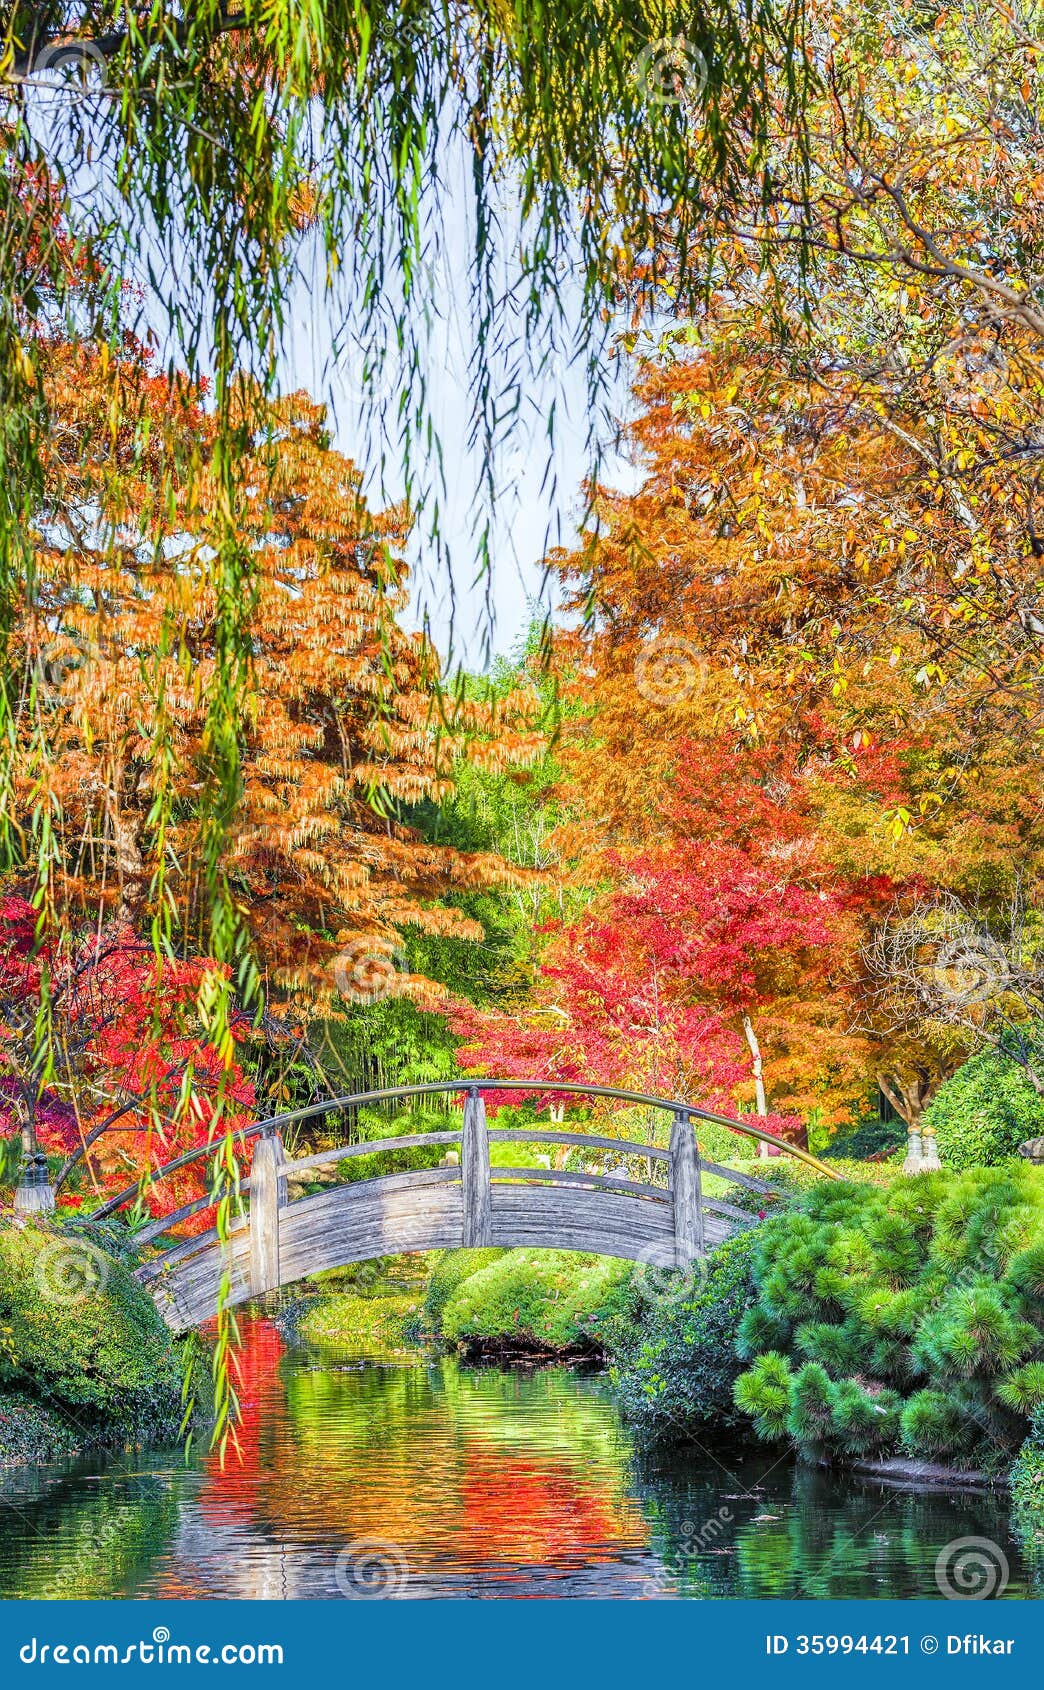 162%20Weeping%20Willow%20Japanese%20Garden%20Photos%20-%20Free%20&amp;%20Royalty-Free%20Stock%20%20Photos%20from%20Dreamstime